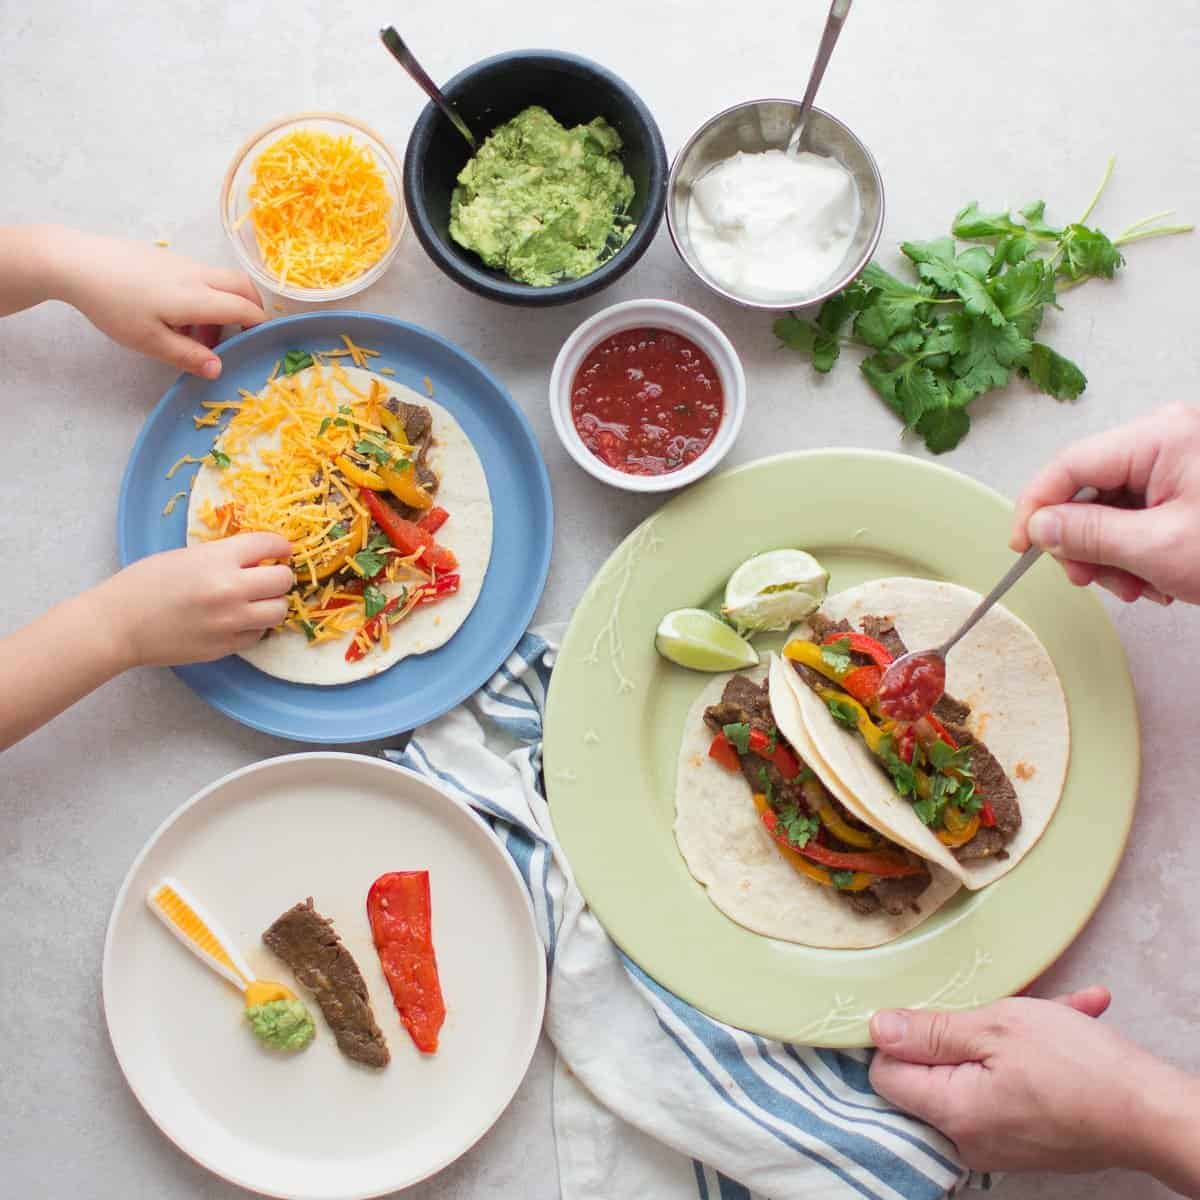 Steak fajitas served family-style with an assortment of toppings and toddler, baby, and adult's plate with tortilla.